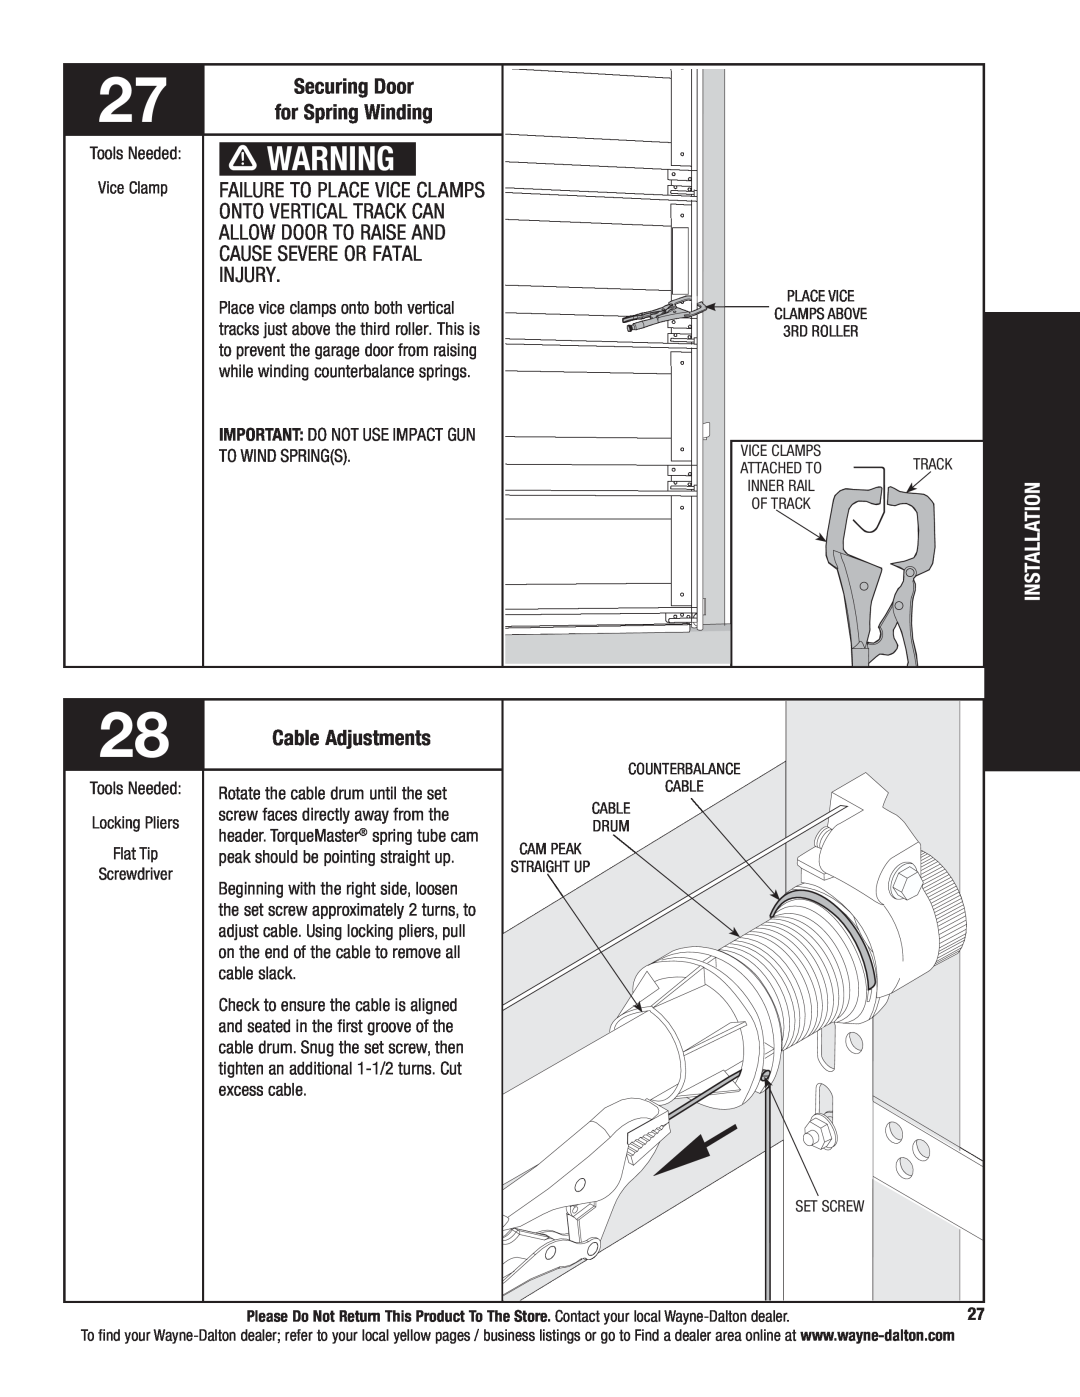 Wayne-Dalton 5120 Securing Door, Failure to place vice clamps, onto vertical Track can, allow door to raise and, injury 